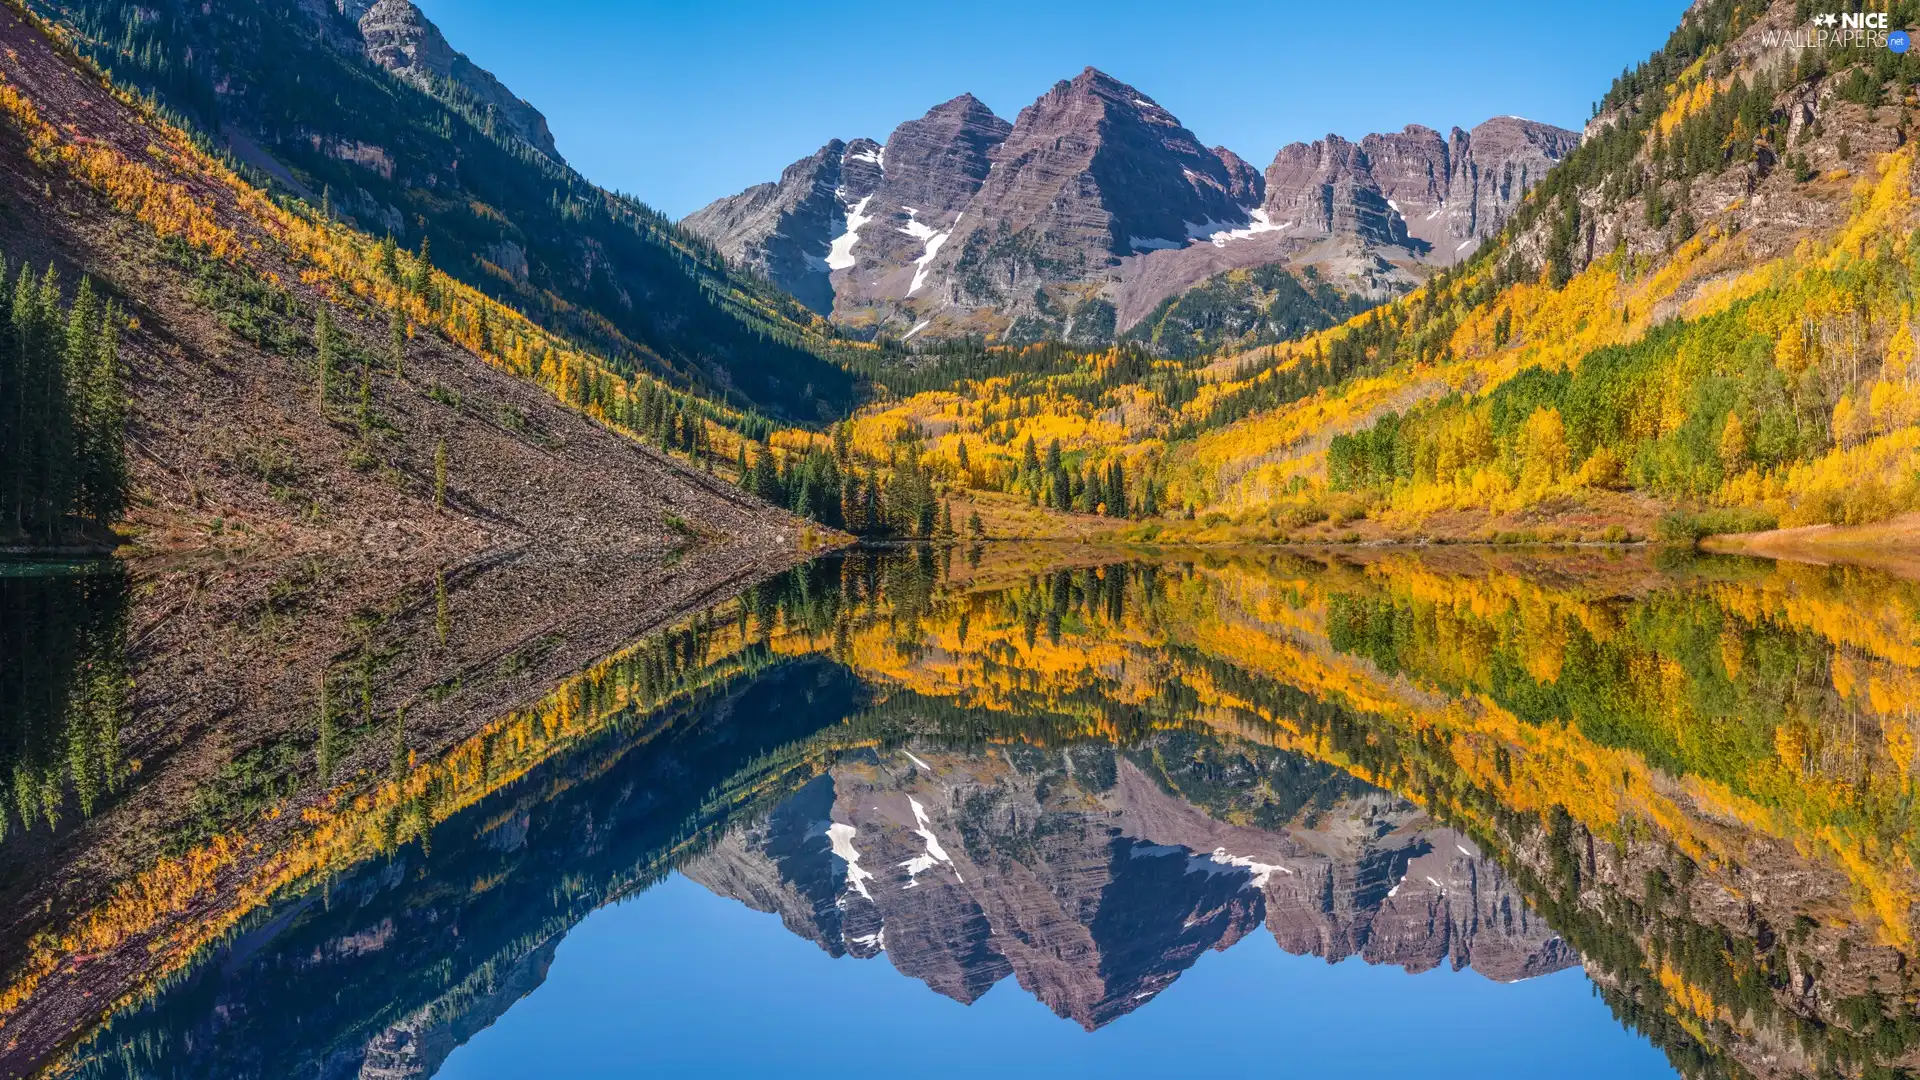 Maroon Lake, autumn, The United States, trees, State of Colorado, Maroon Bells Peaks, rocky mountains, viewes